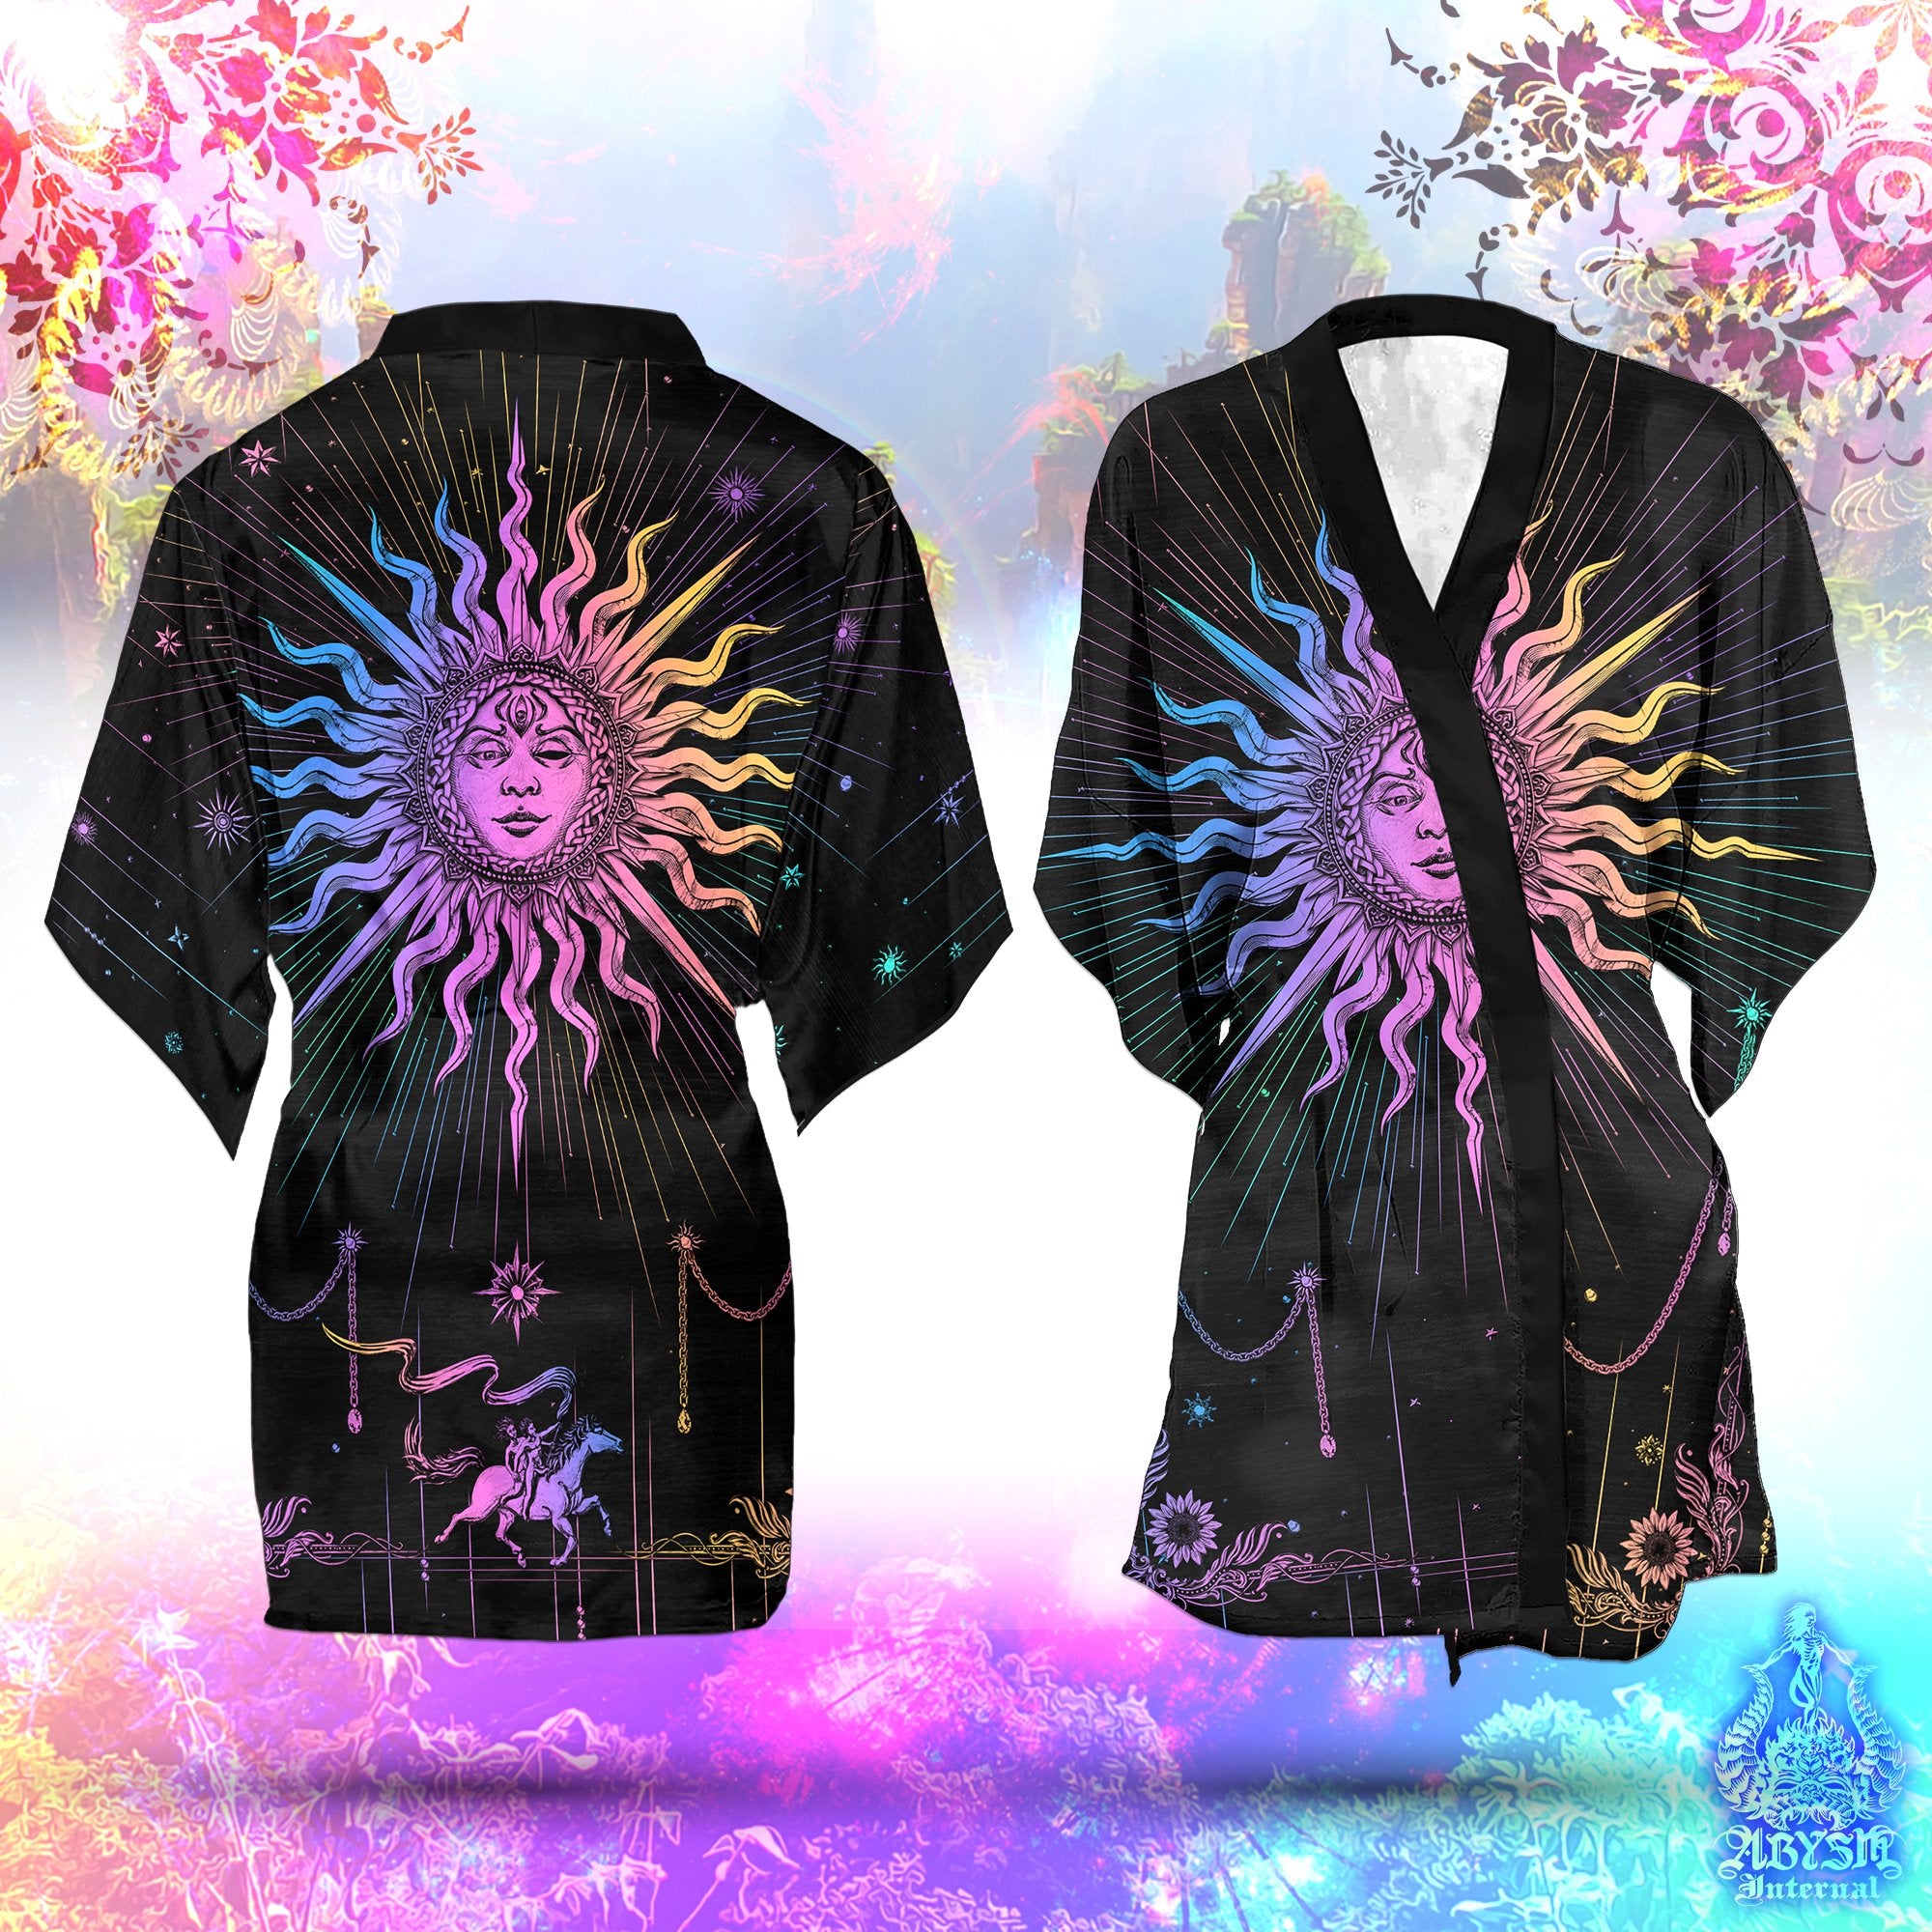 The Sun Short Kimono Robe, Colorful Beach Party Outfit, Tarot Arcana Coverup, Indie and Boho Summer Festival Clothing, Unisex - Dark Pastel - Abysm Internal